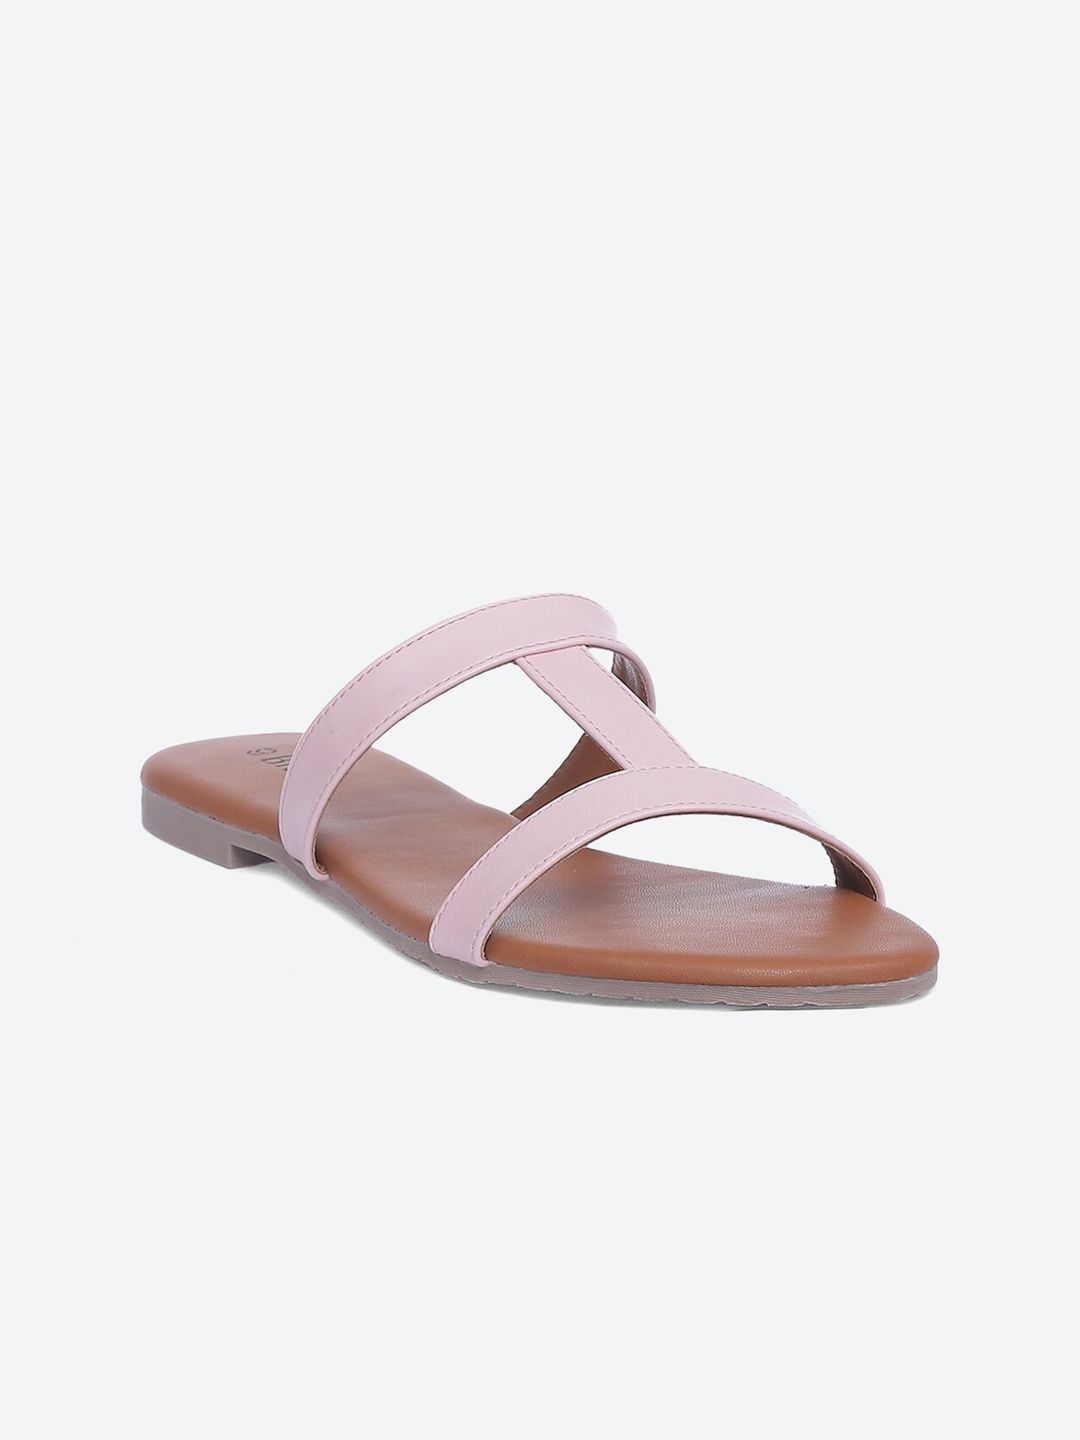 Biba Women Pink Colourblocked T-Strap Flats with Buckles Price in India